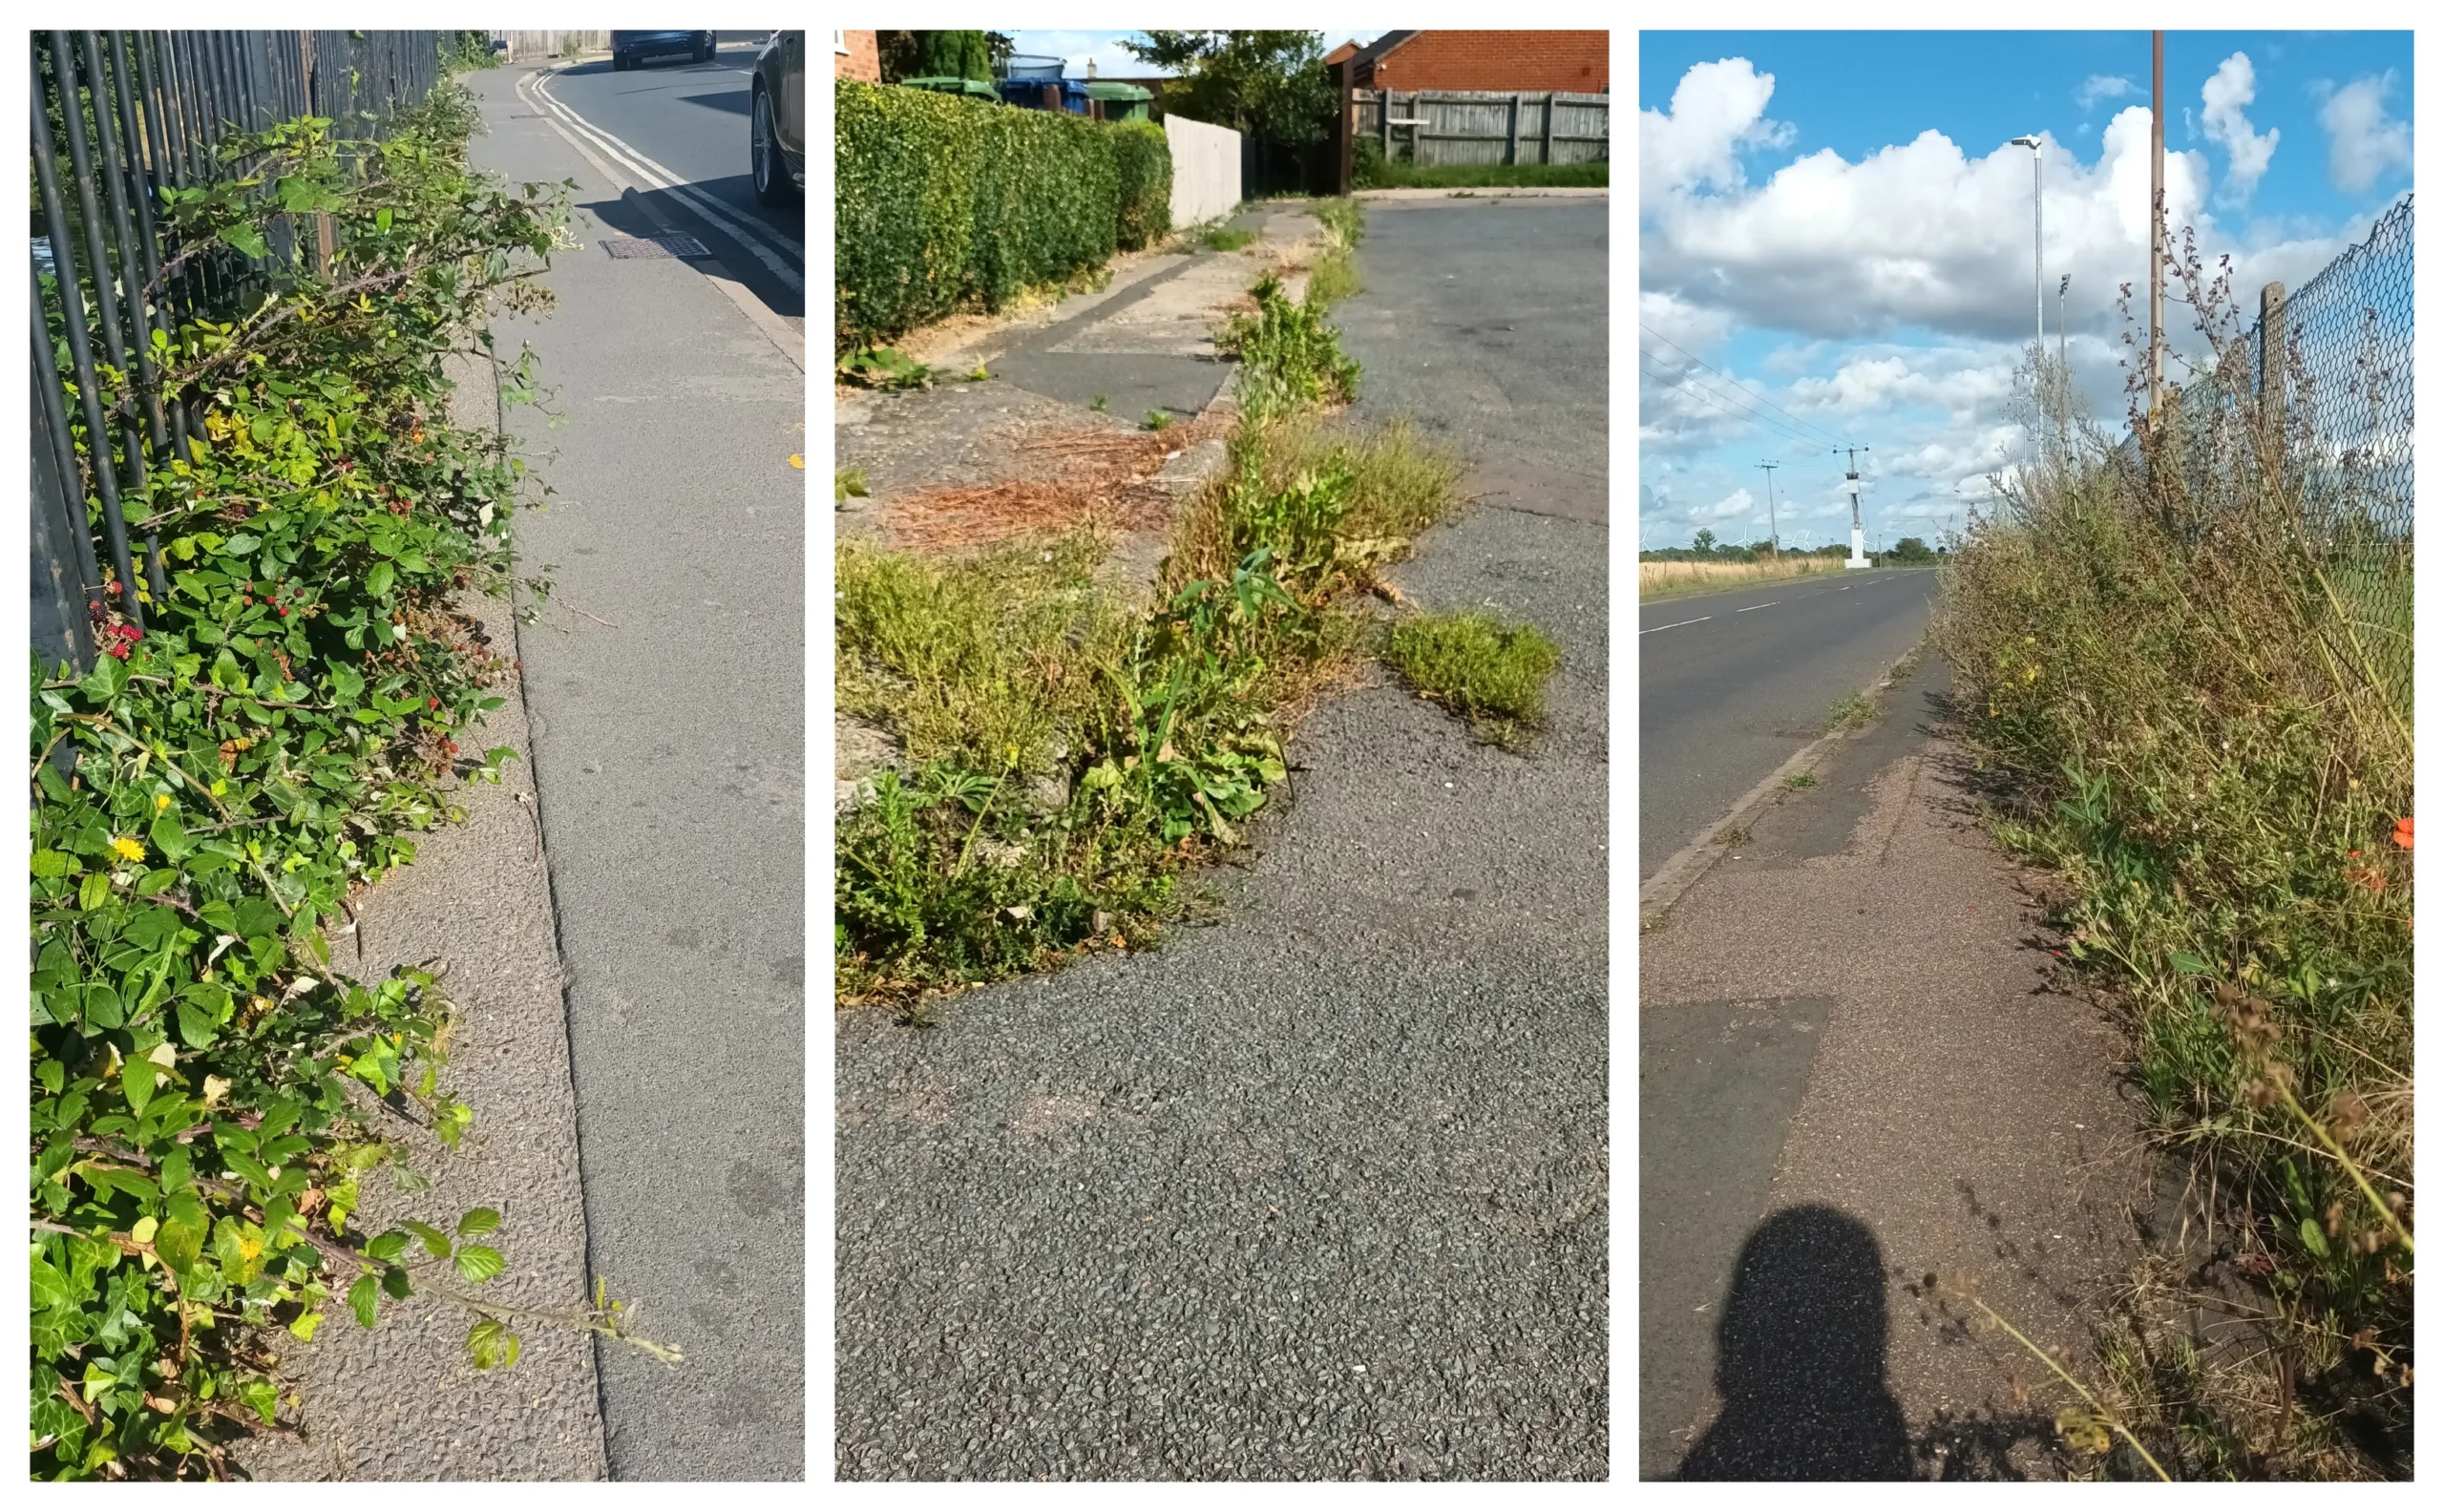 Weeds menace: Some recent photos provided of weeds out of control across Cambridgeshire. These from March